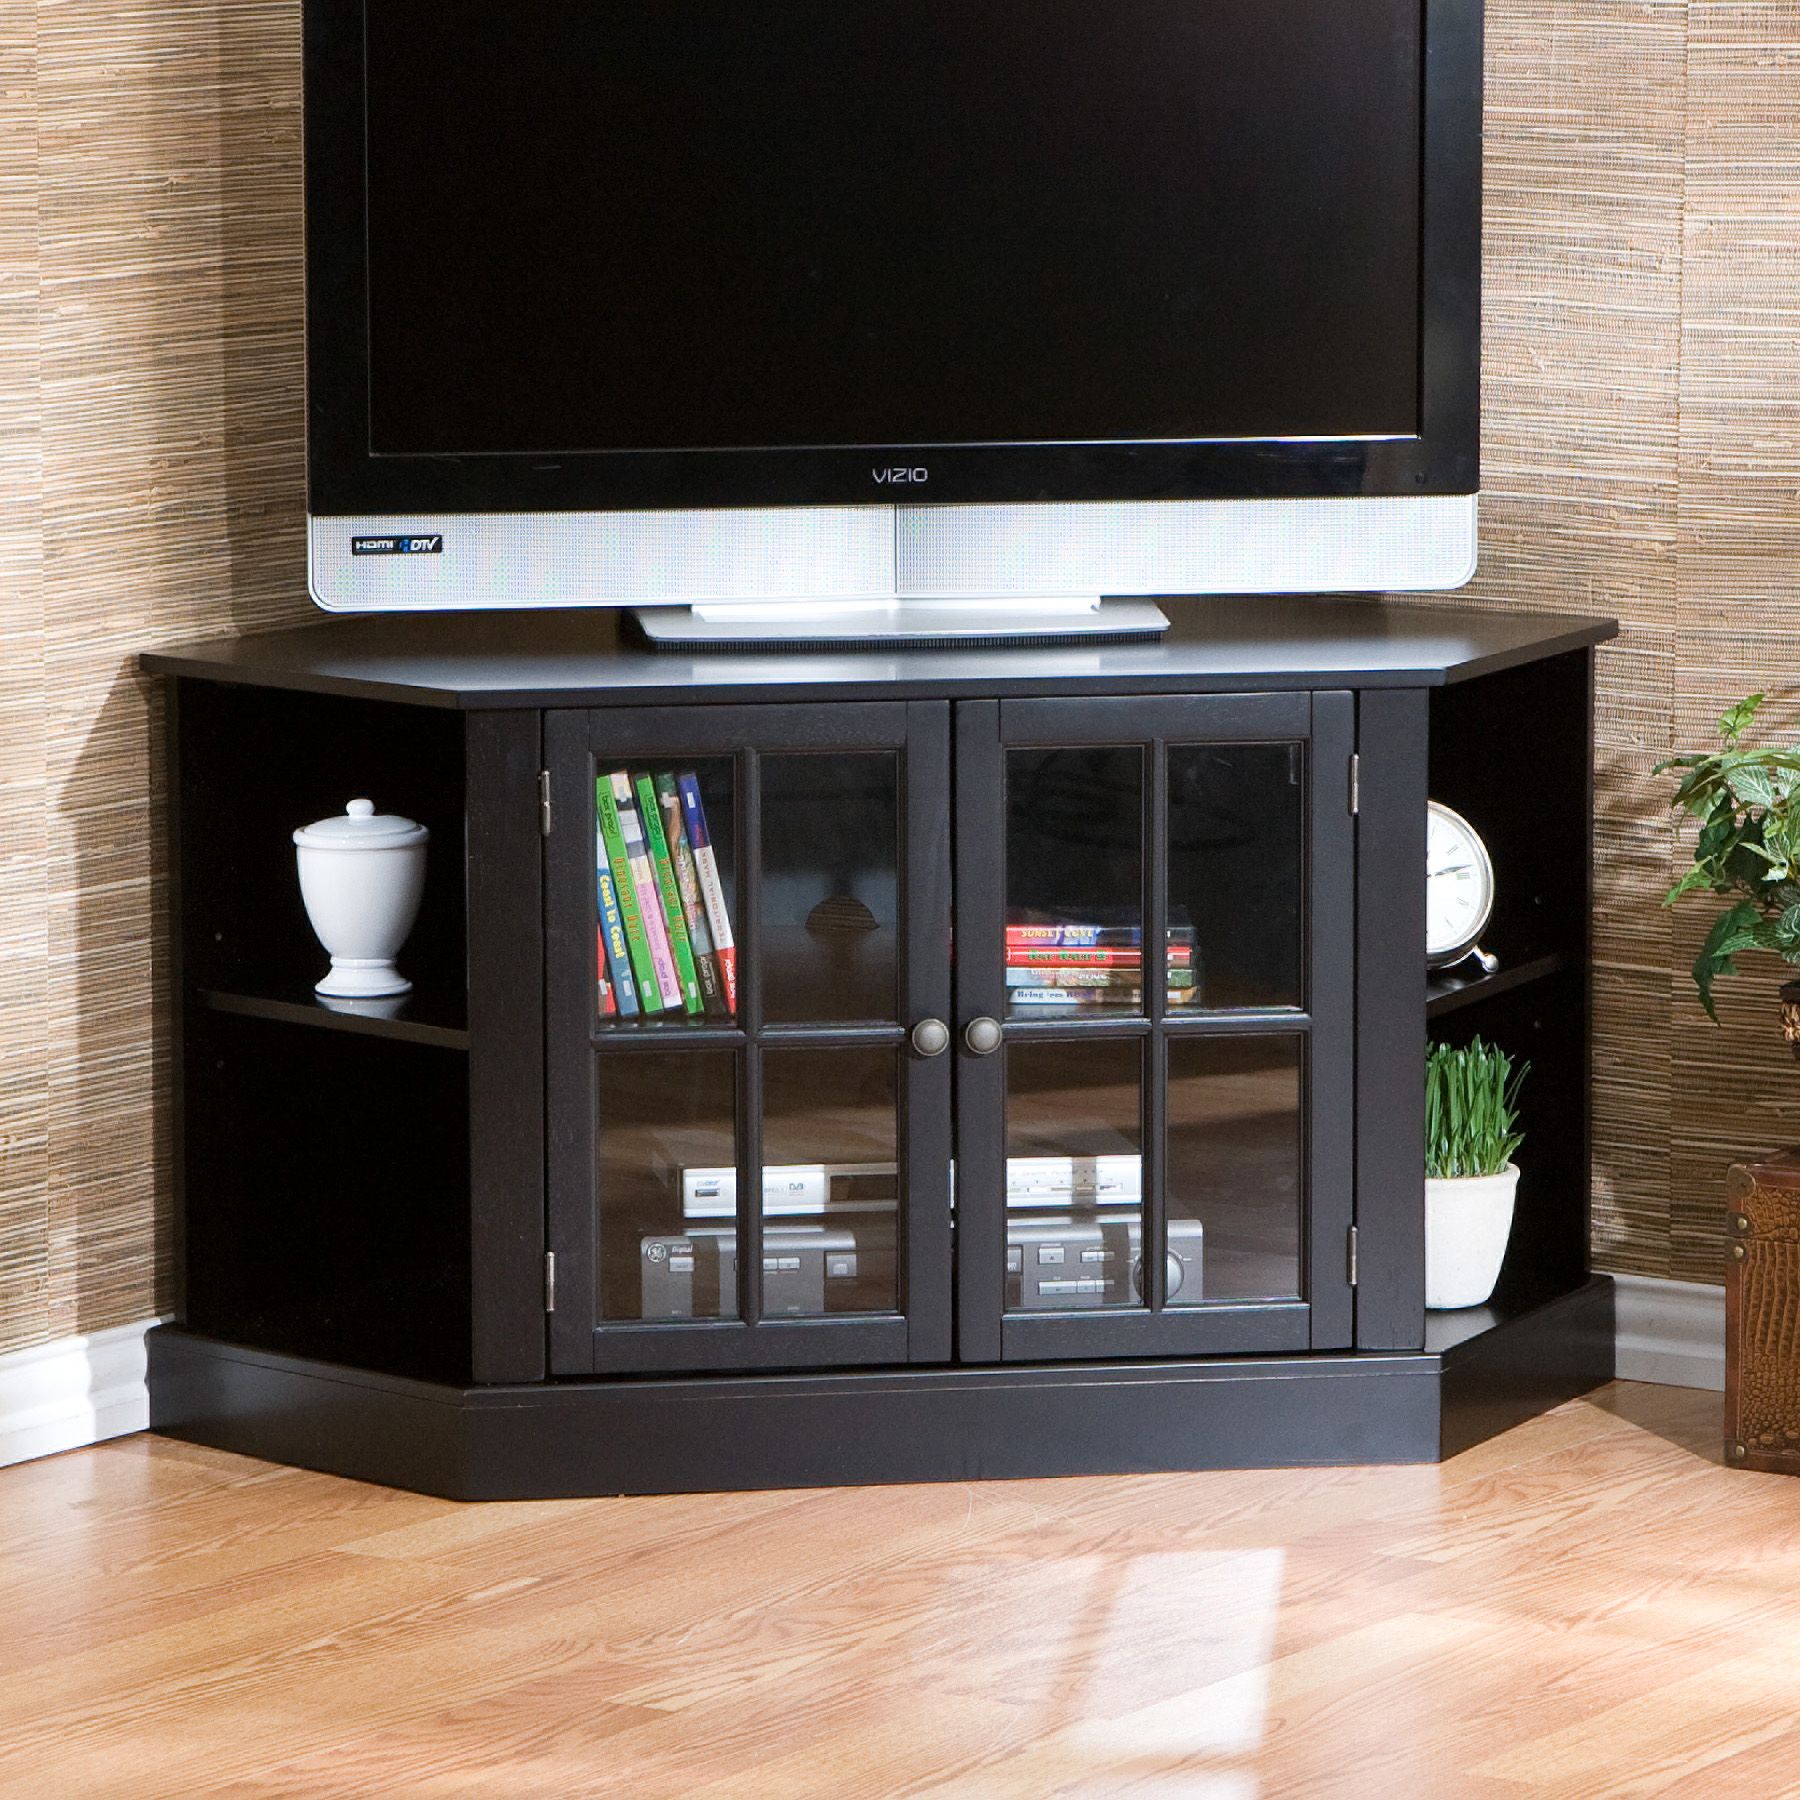 Tv Stands, Tv Consoles, Cabinets Available In Various Pertaining To Unique Corner Tv Stands (View 7 of 15)